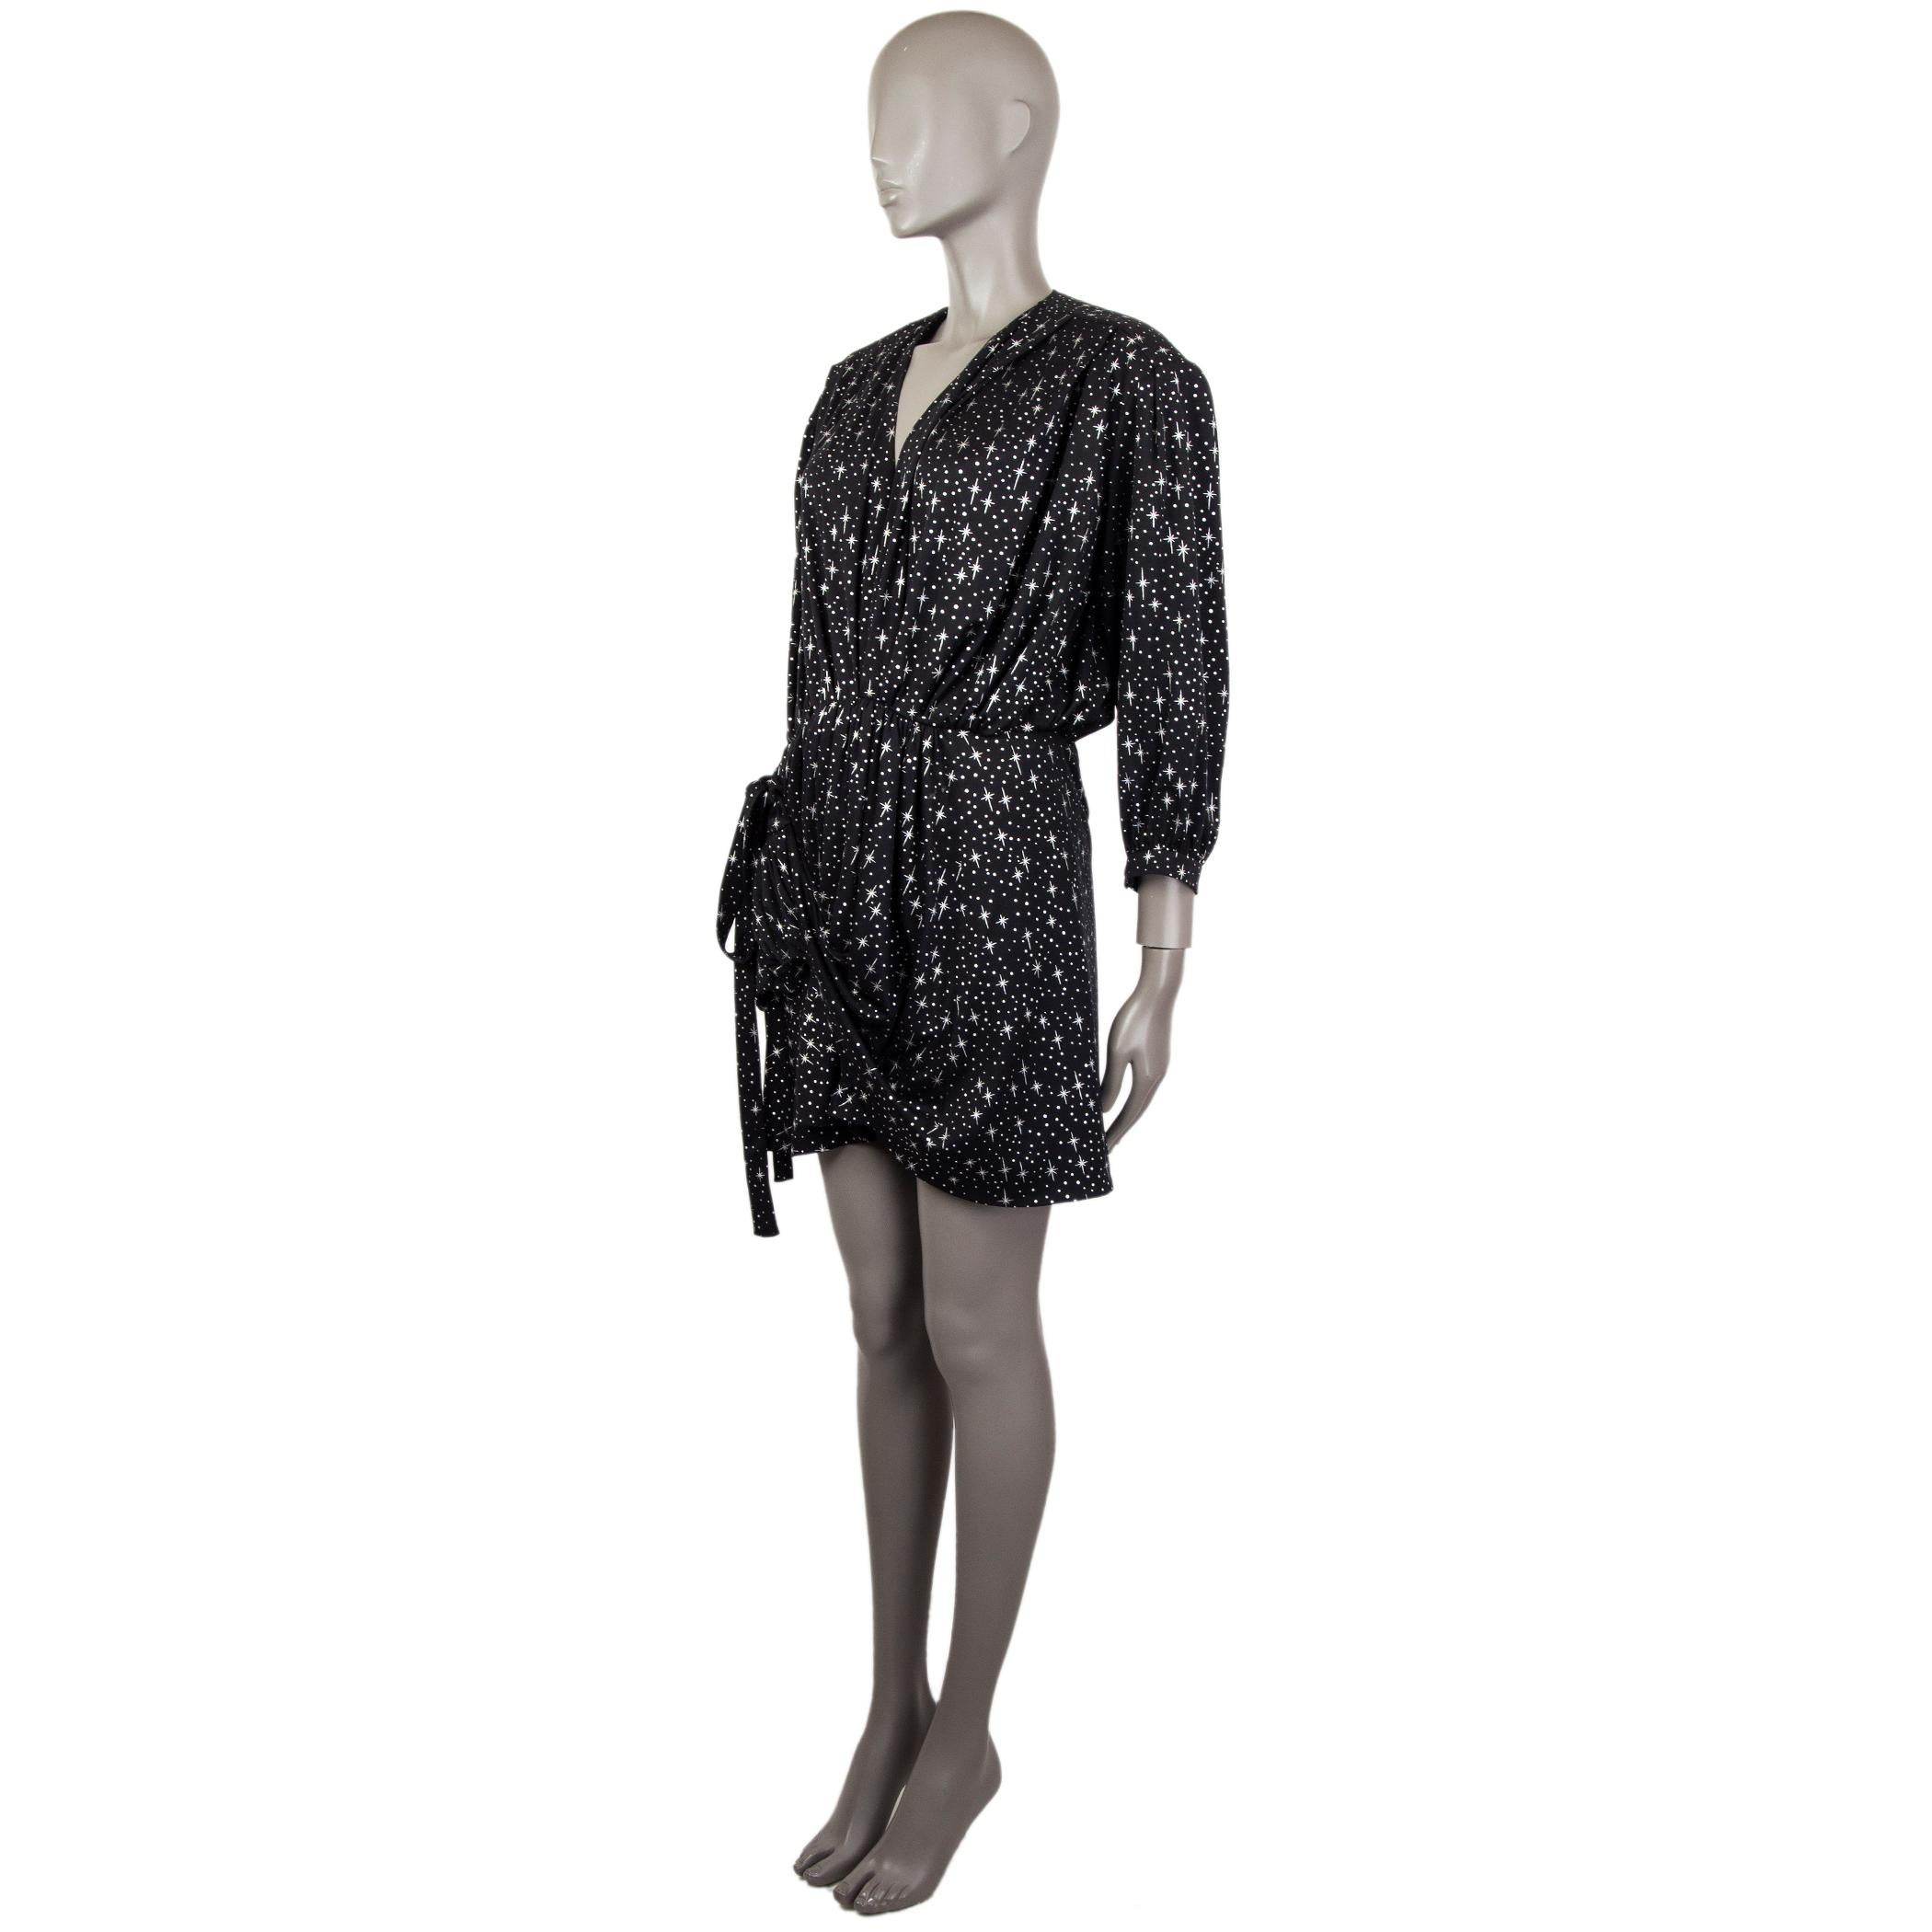 100% authentic Balenciaga stars-print dress in black and silver polyester (100%). With v neck, pleated and padded shoulders, gathered layered skirt, and buttoned cuffs. Ties from hem to the side of the waist for a draping effect. Unlined. Has been